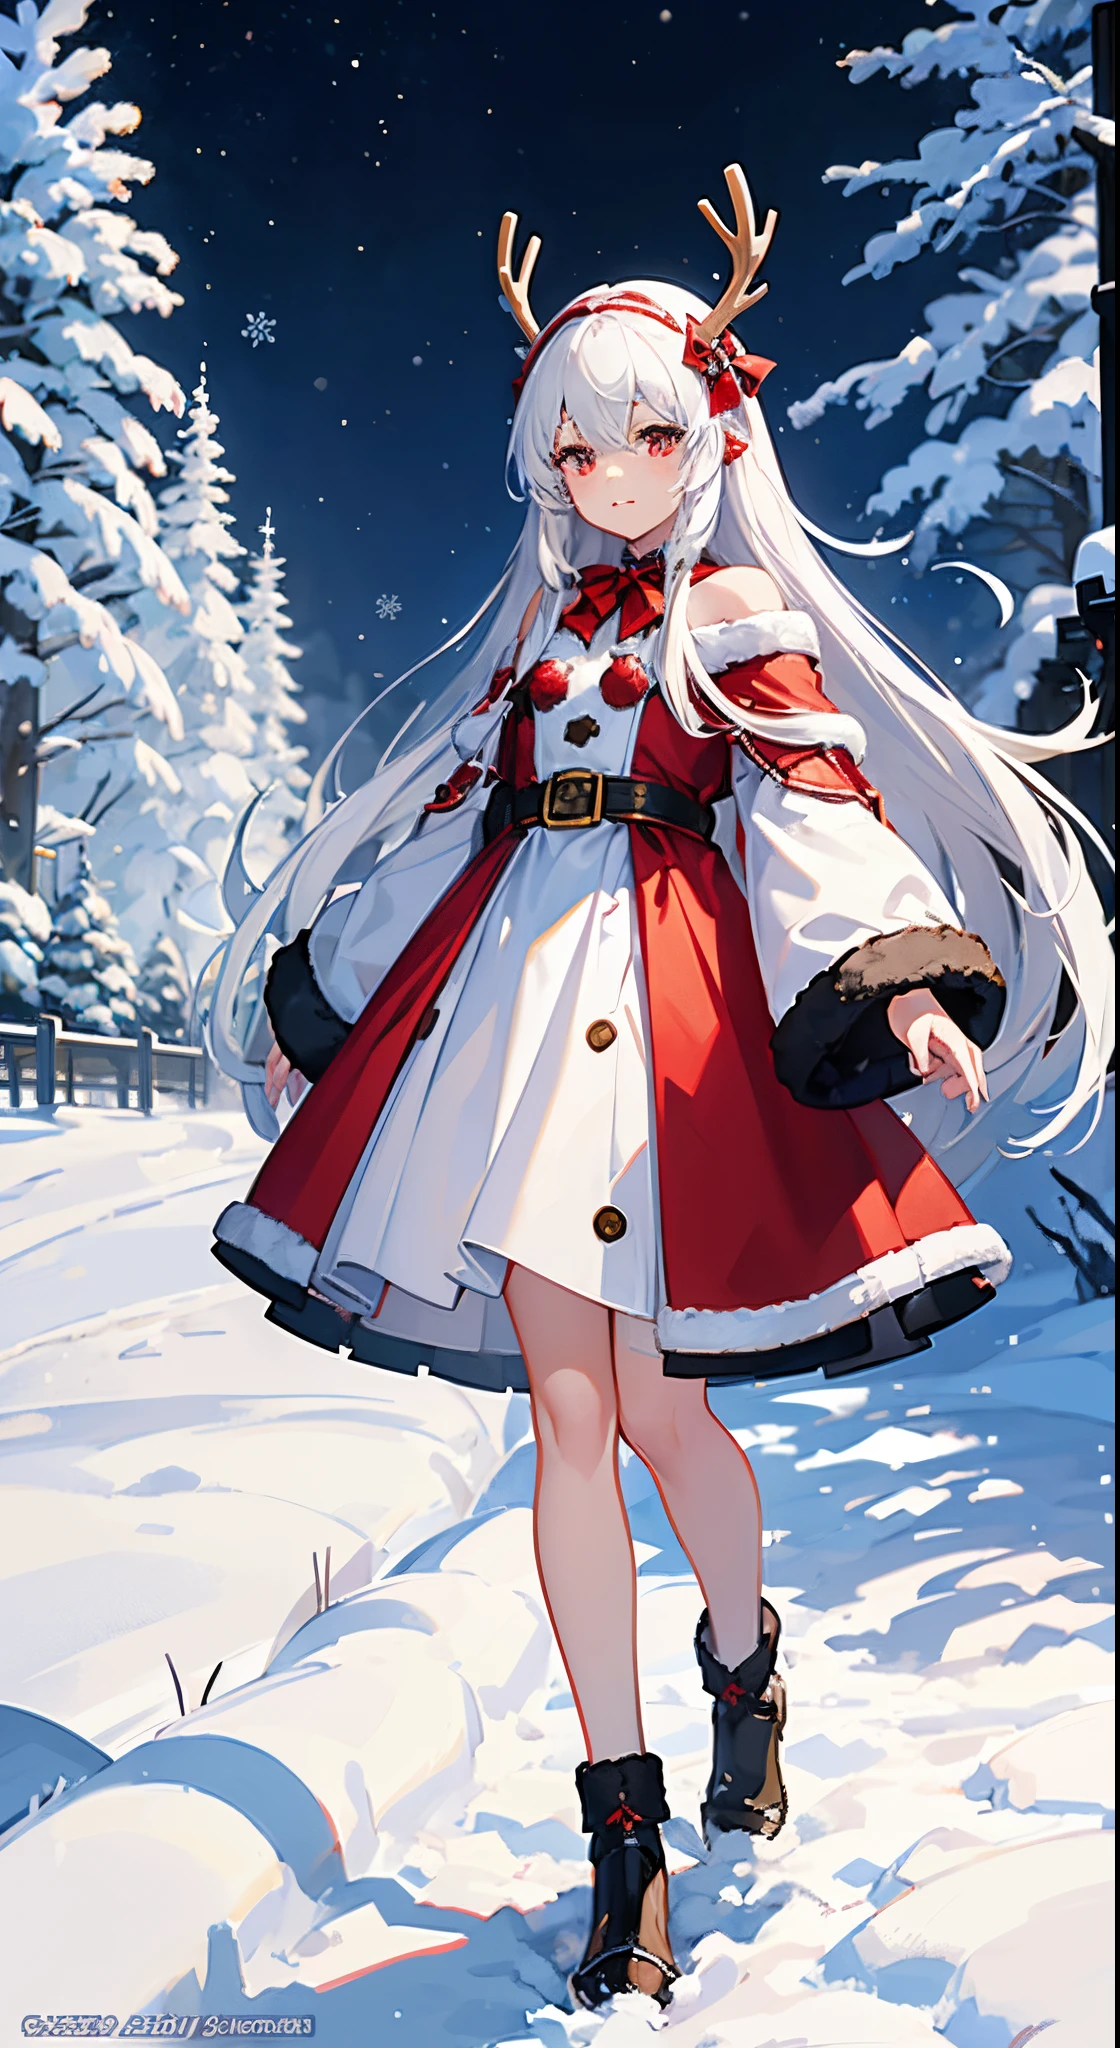 Snowflakes Gently falling snowflakes are a winter wonderland、snowy forest、(Full body portrait of cute silver-haired female Santa Claus)、Reindeer Horn Headband "snowscape",Anime girl in a red and white dress and reindeer antlers walks in the snow,little red riding hood costume、 In the snow, winter concept art, Trending on ArtStation pixiv, in snow, Official art, official artwork, at winter, white haired god, official anime artwork, by Shitao, Standing in the snow, Anime visuals of cute girls, High quality anime art style